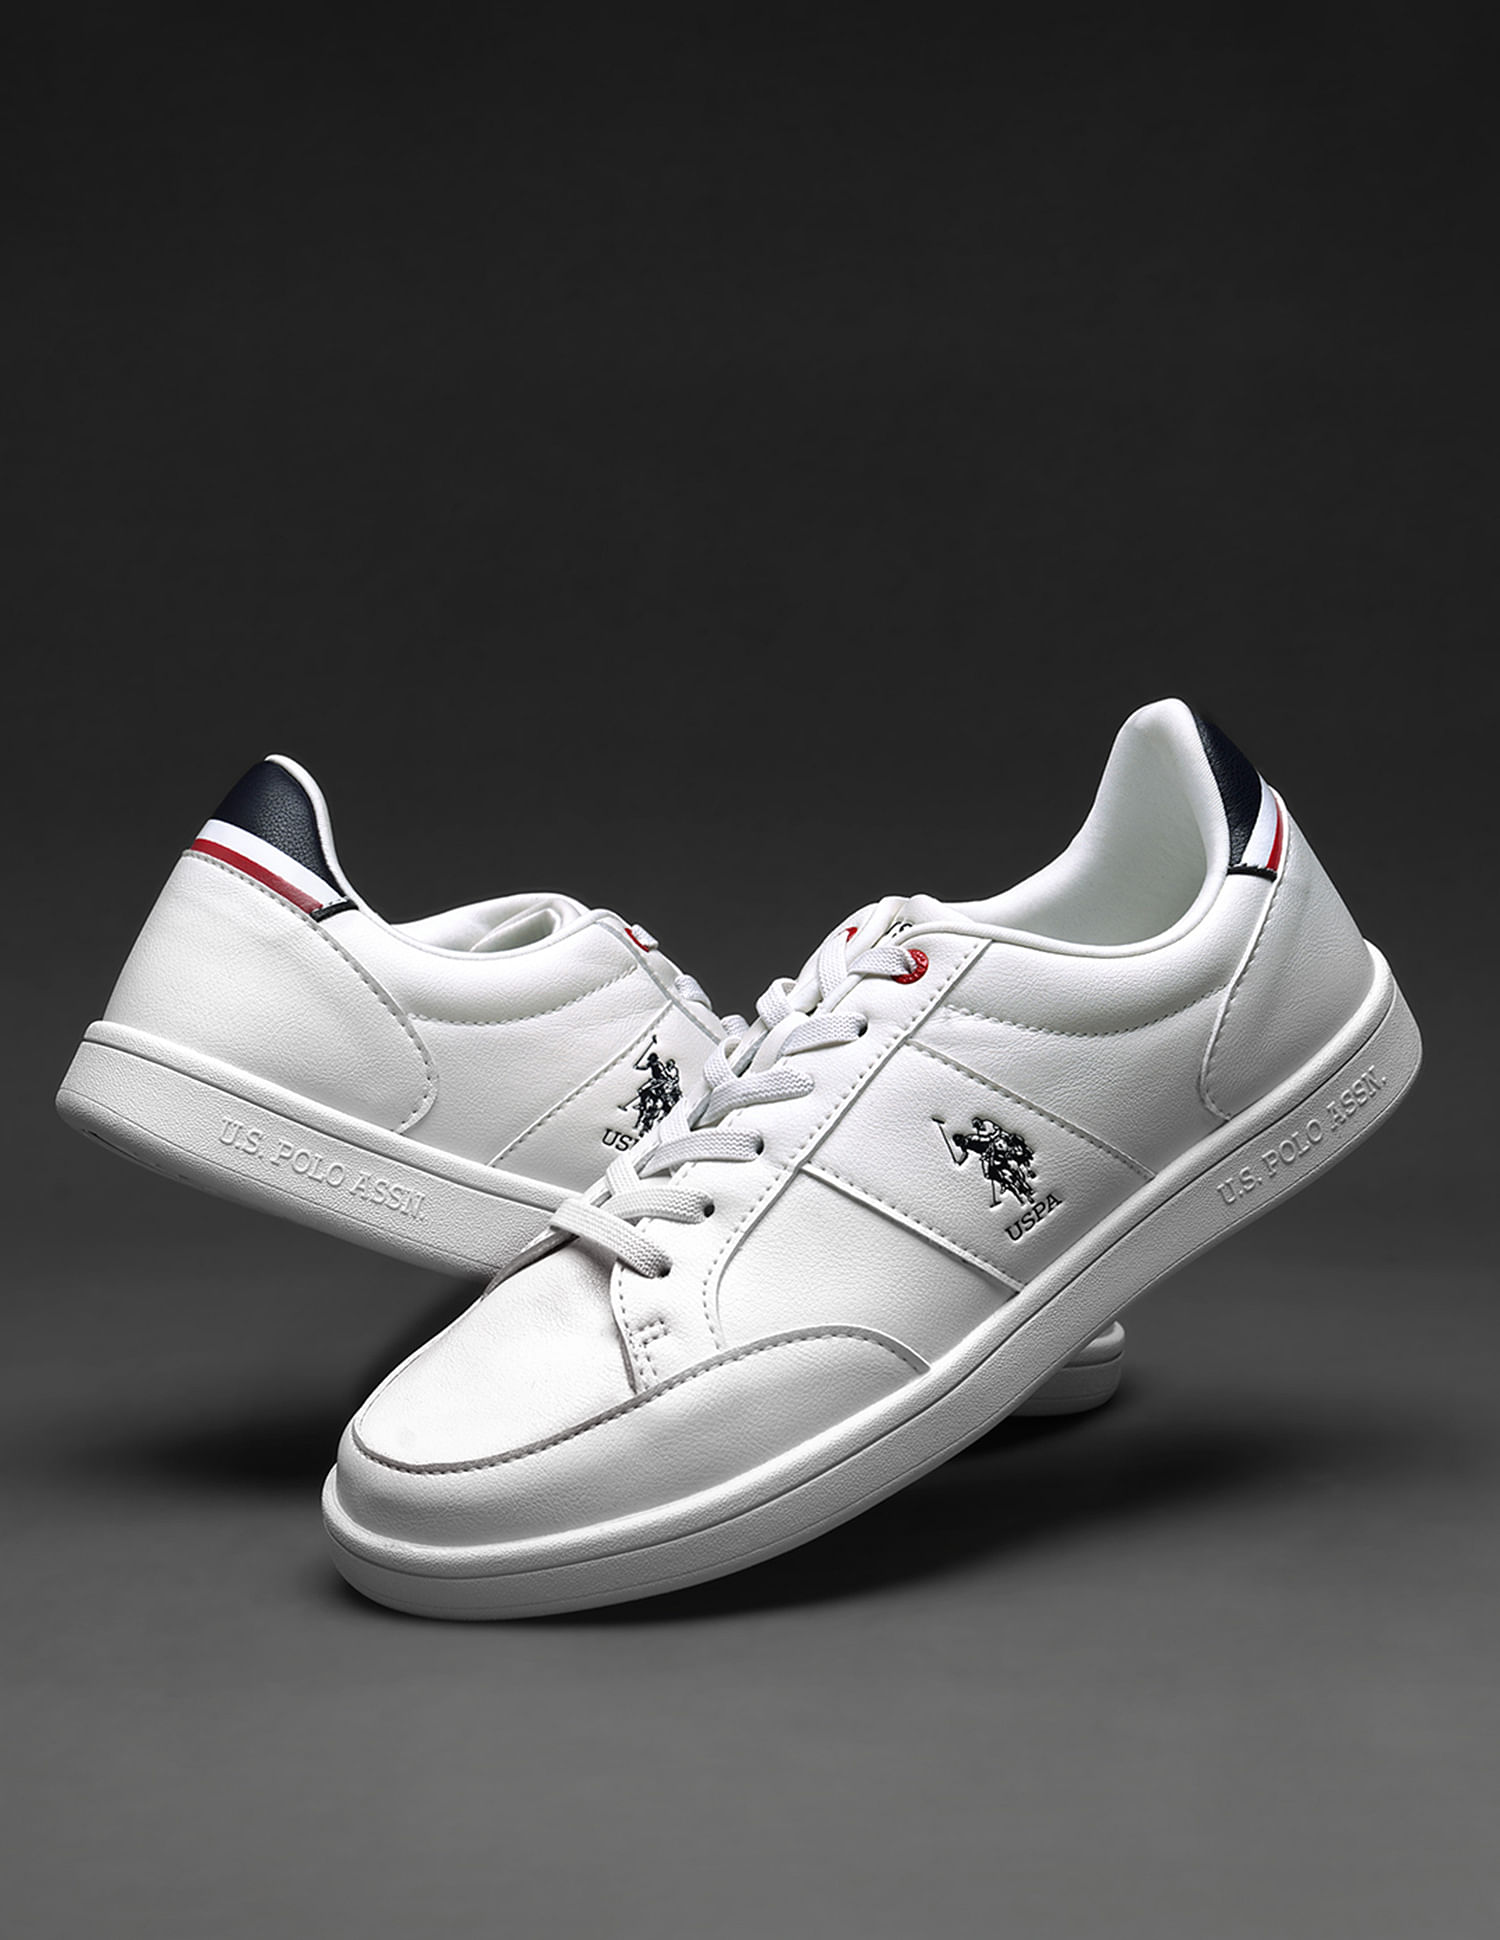 Experience more than 211 uspa white sneakers best